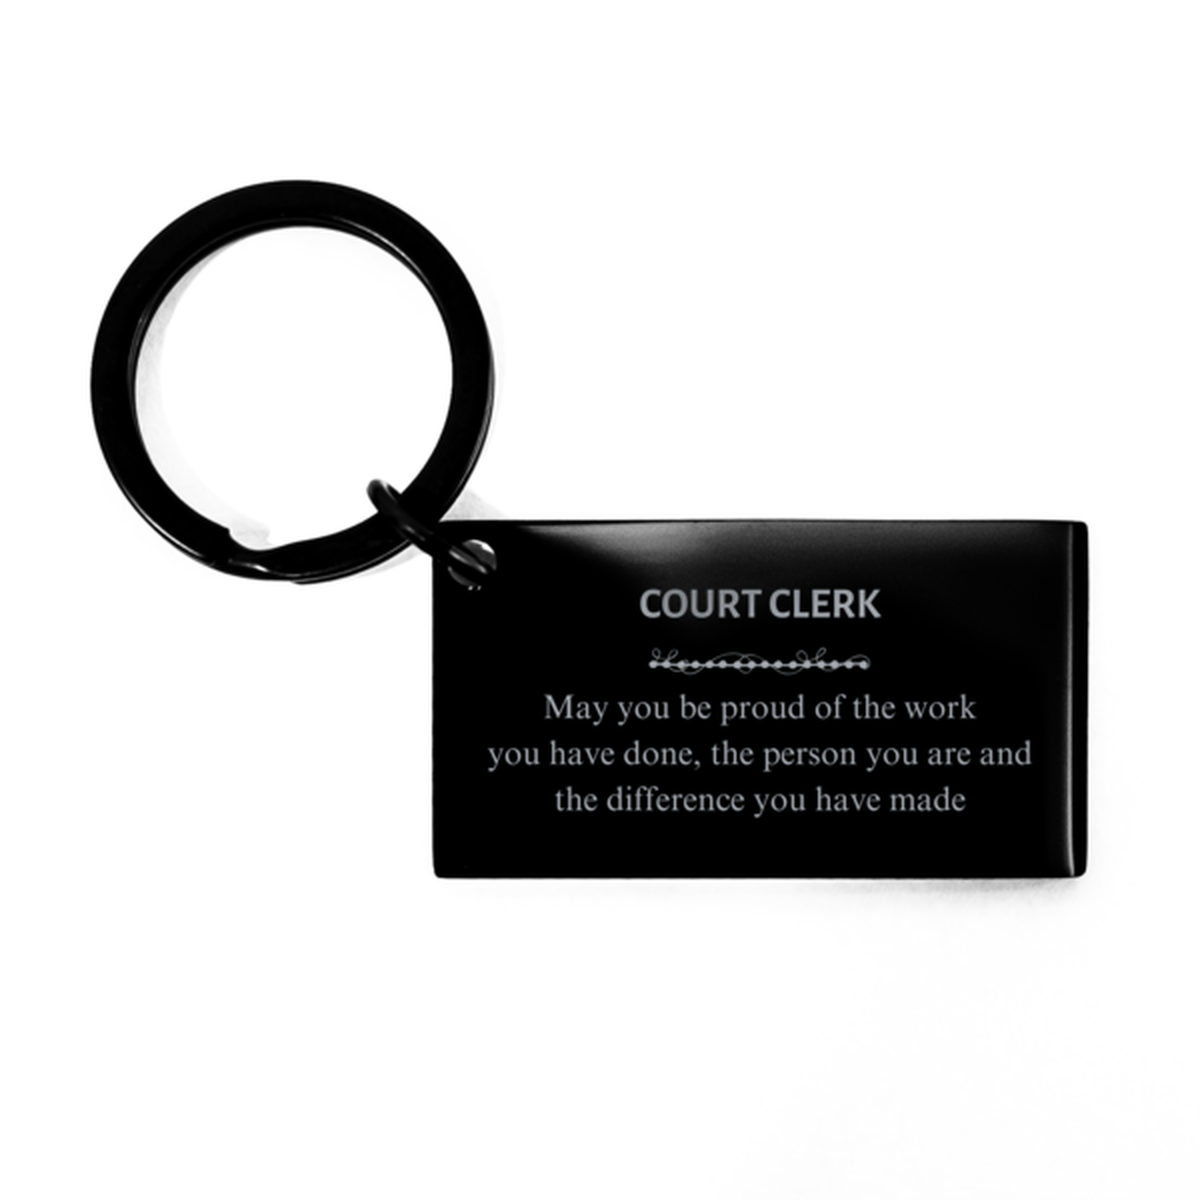 Financial Advisor May you be proud of the work you have done, Retirement Court Clerk Keychain for Colleague Appreciation Gifts Amazing for Court Clerk